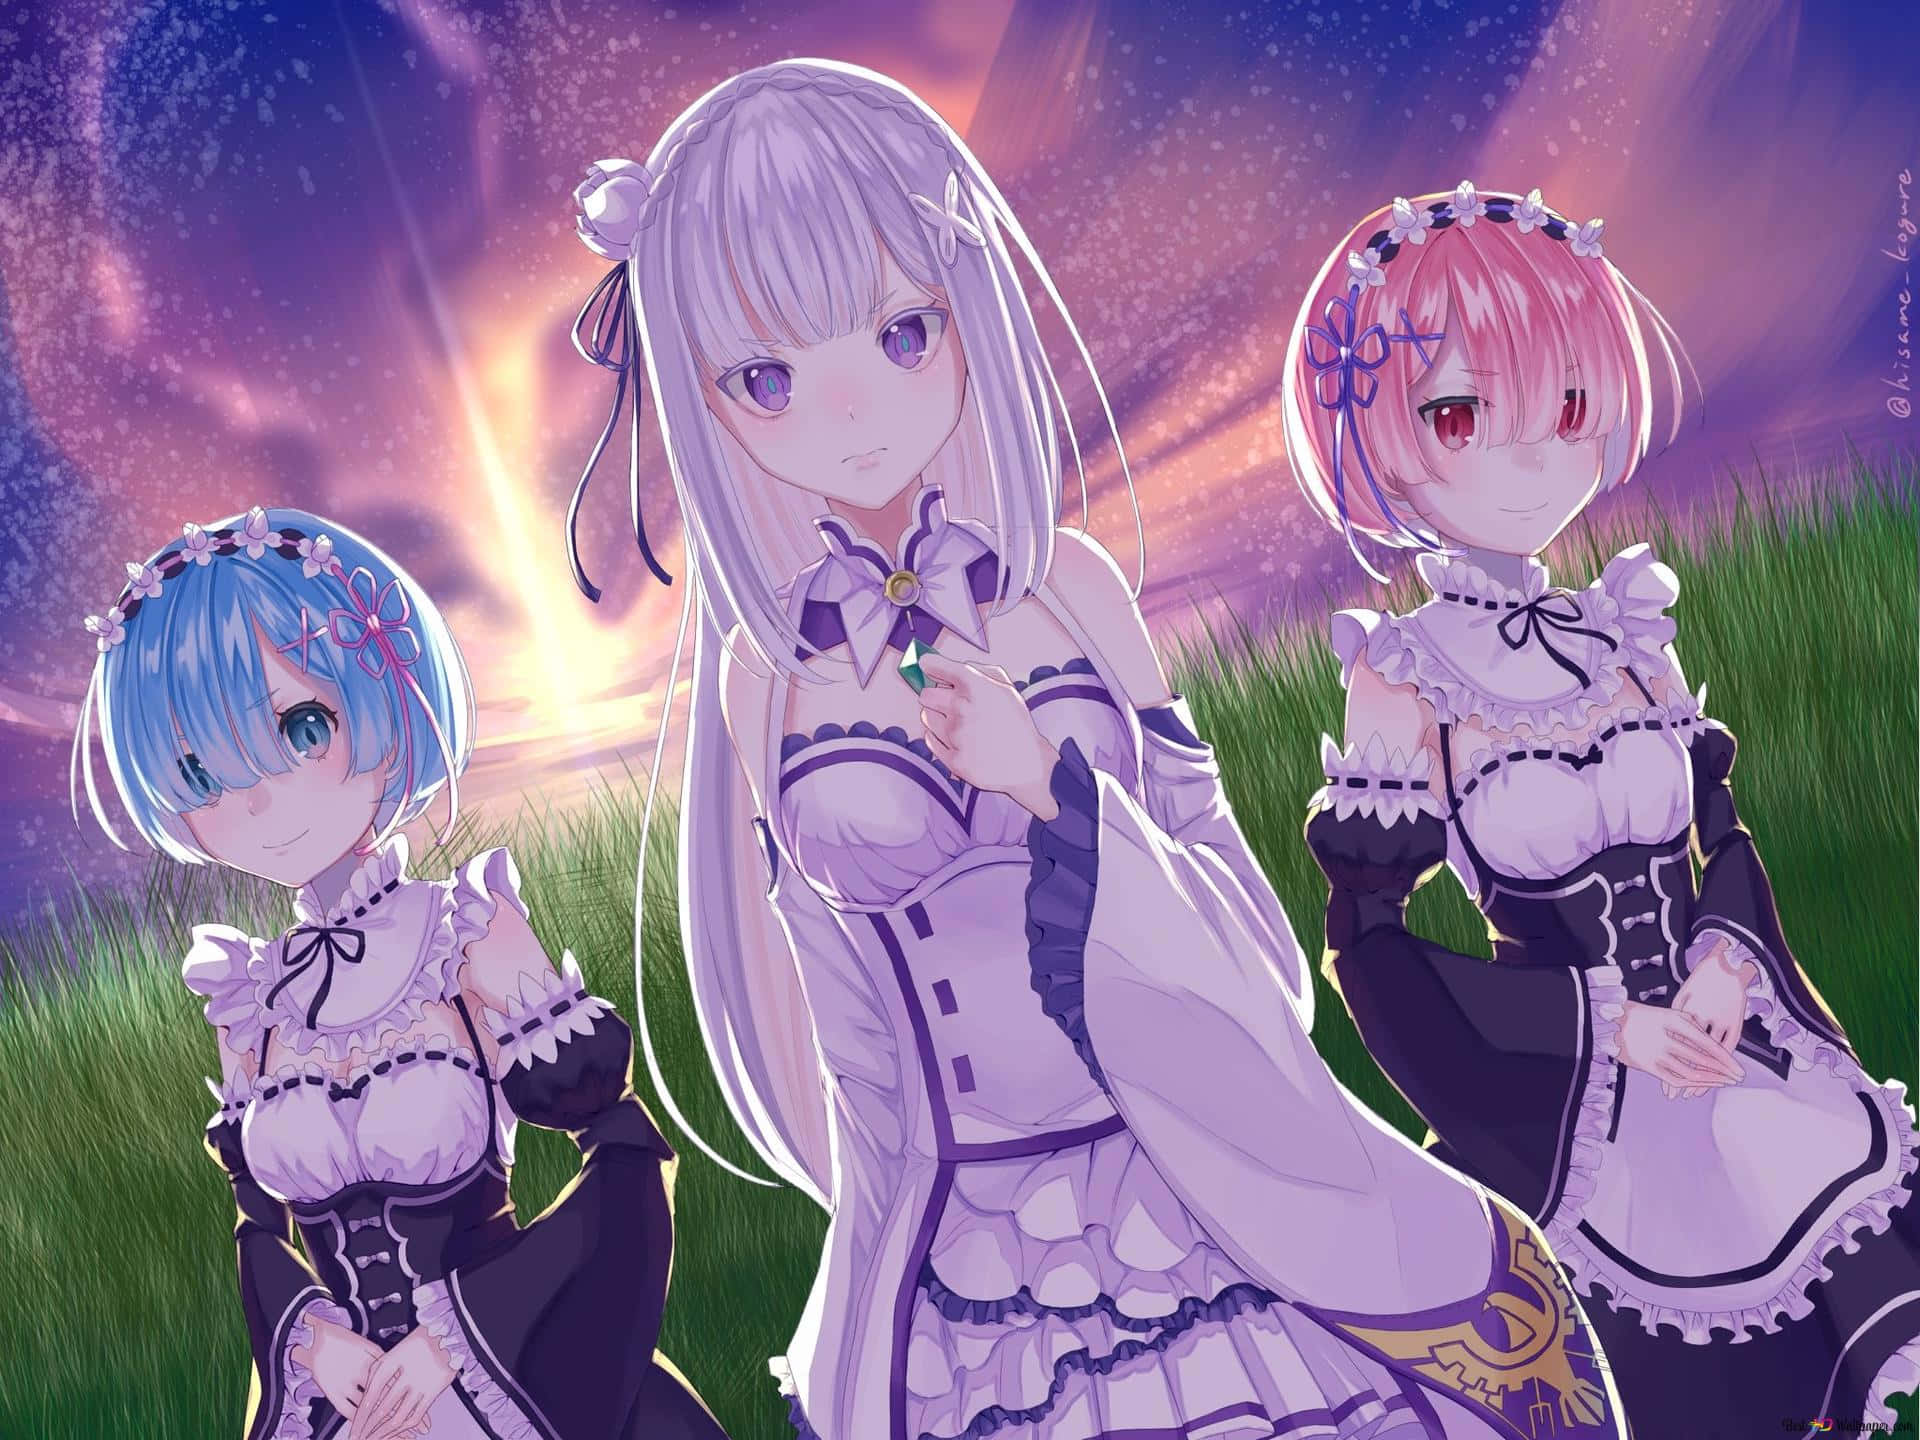 Three Anime Girls Standing In A Field With A Starry Sky Wallpaper